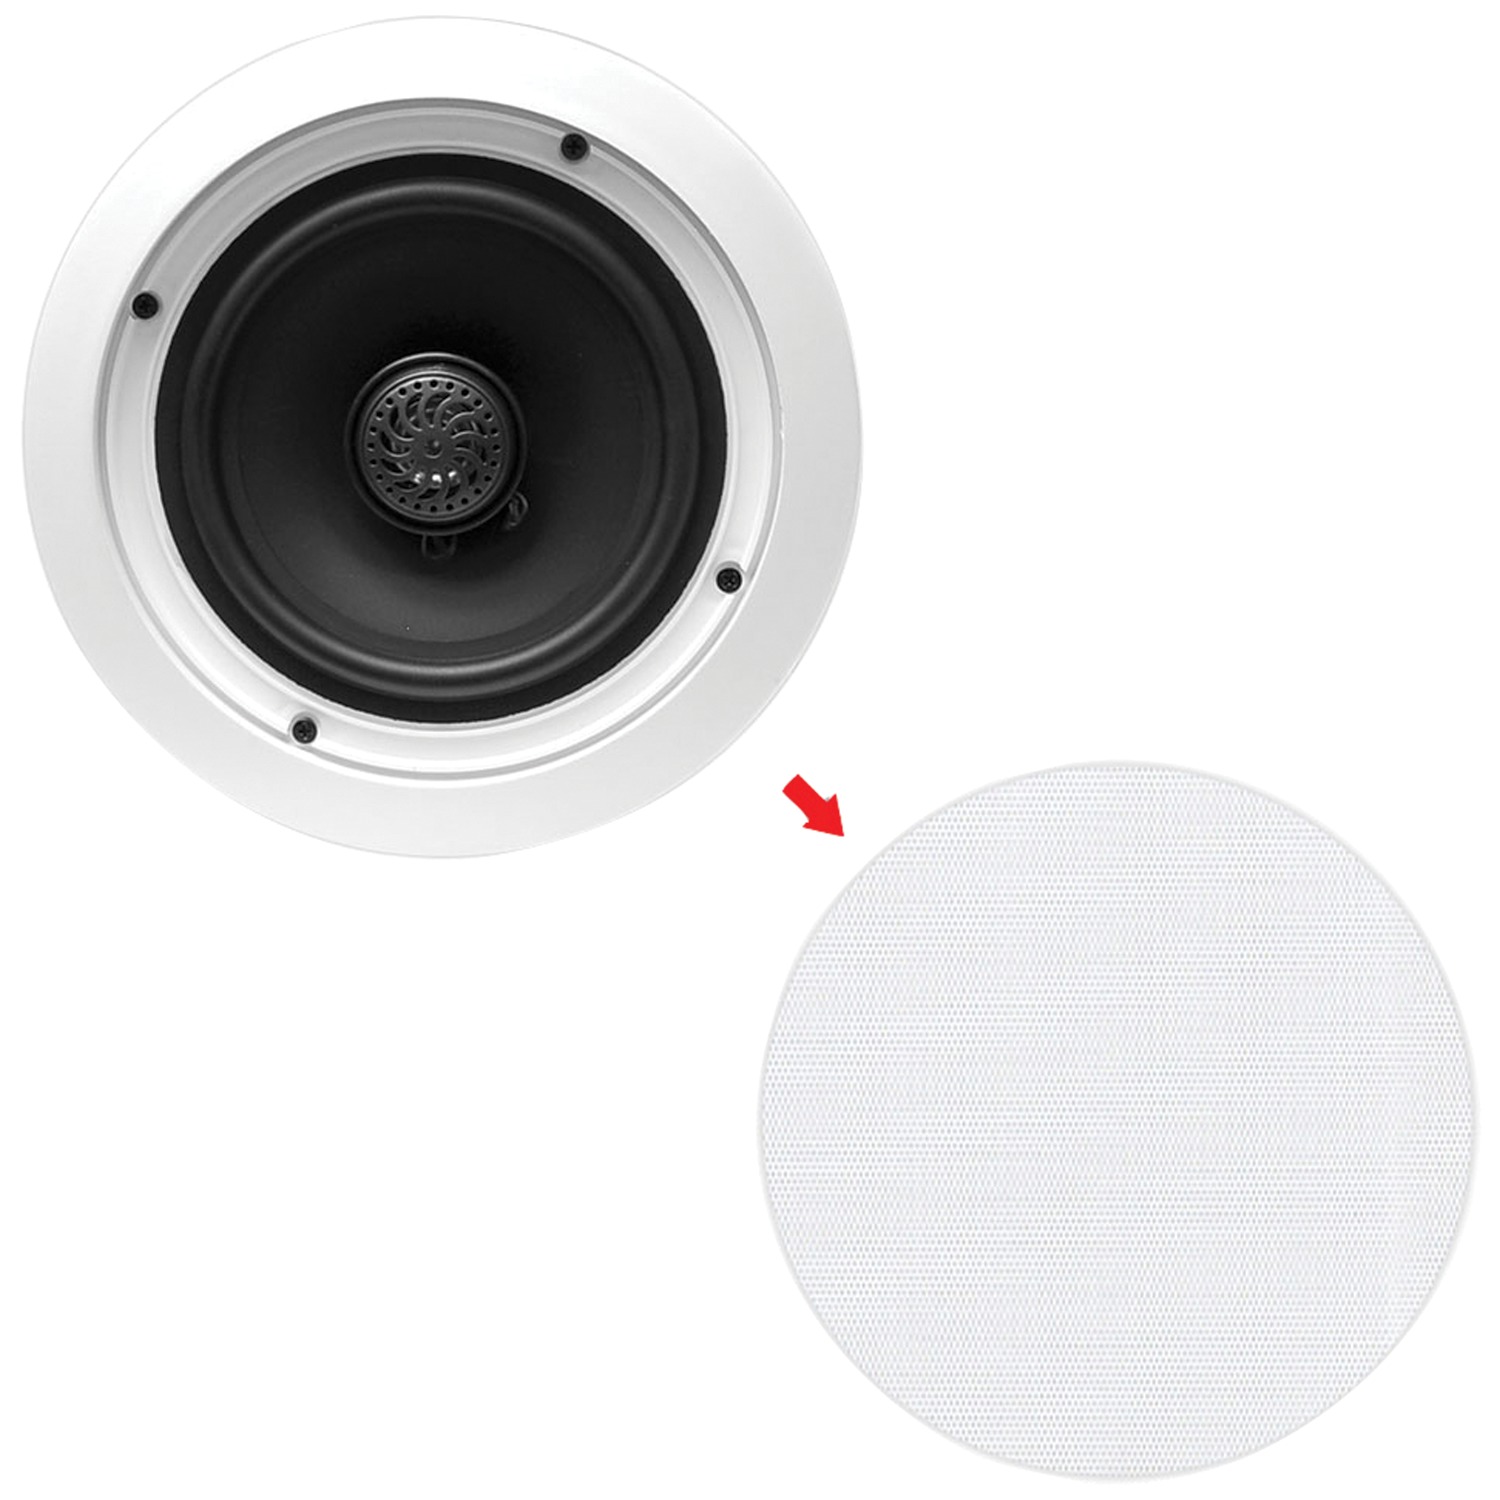 Pyle Home 6.5 Inch 250W 2 Way In Wall In Ceiling Stereo Speaker, Pair | PDIC60T - image 3 of 4